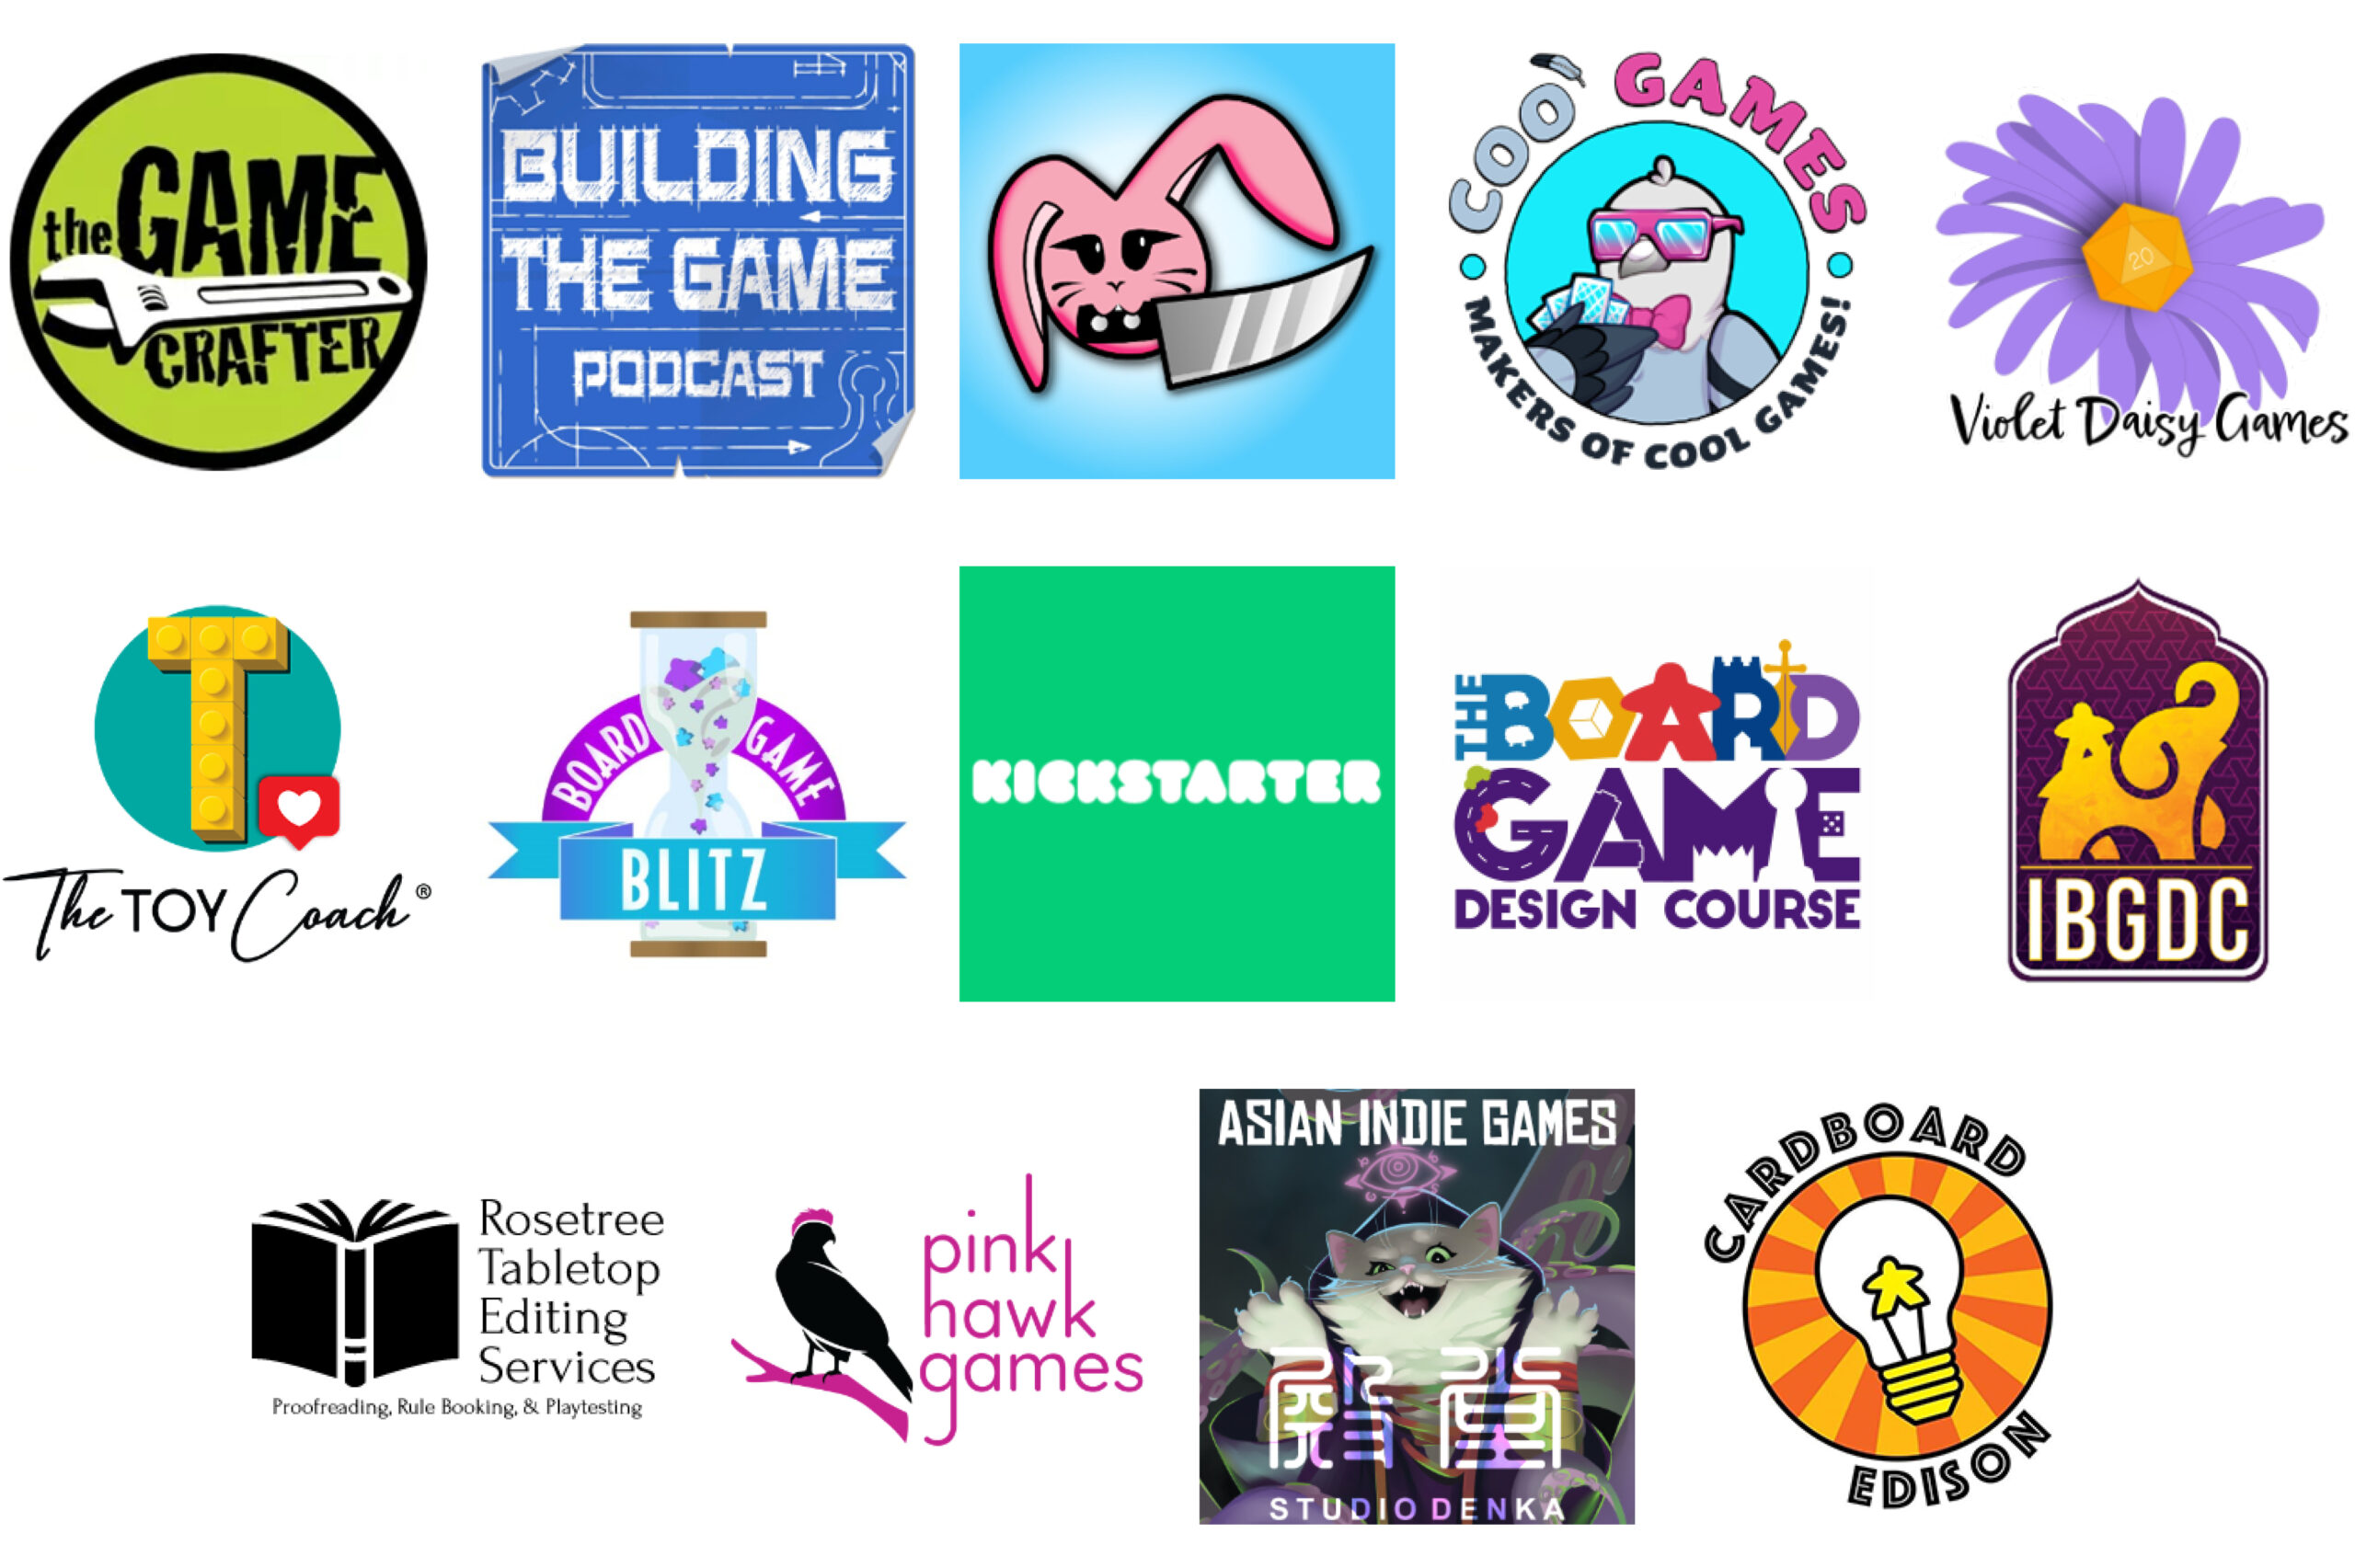 Sponsor logos for Jan 2024: The Game Crafter, Building the Game Podcast, Knife Bunny, Coo Games, Violet Daisy Games, The Toy Coach, Board Game Blitz, Kickstarter, The Board Game Design Course, IBGDC, Rosetree Tabletop Editing Services, Pink Hawk Games, Studio Denka, Cardboard Edison